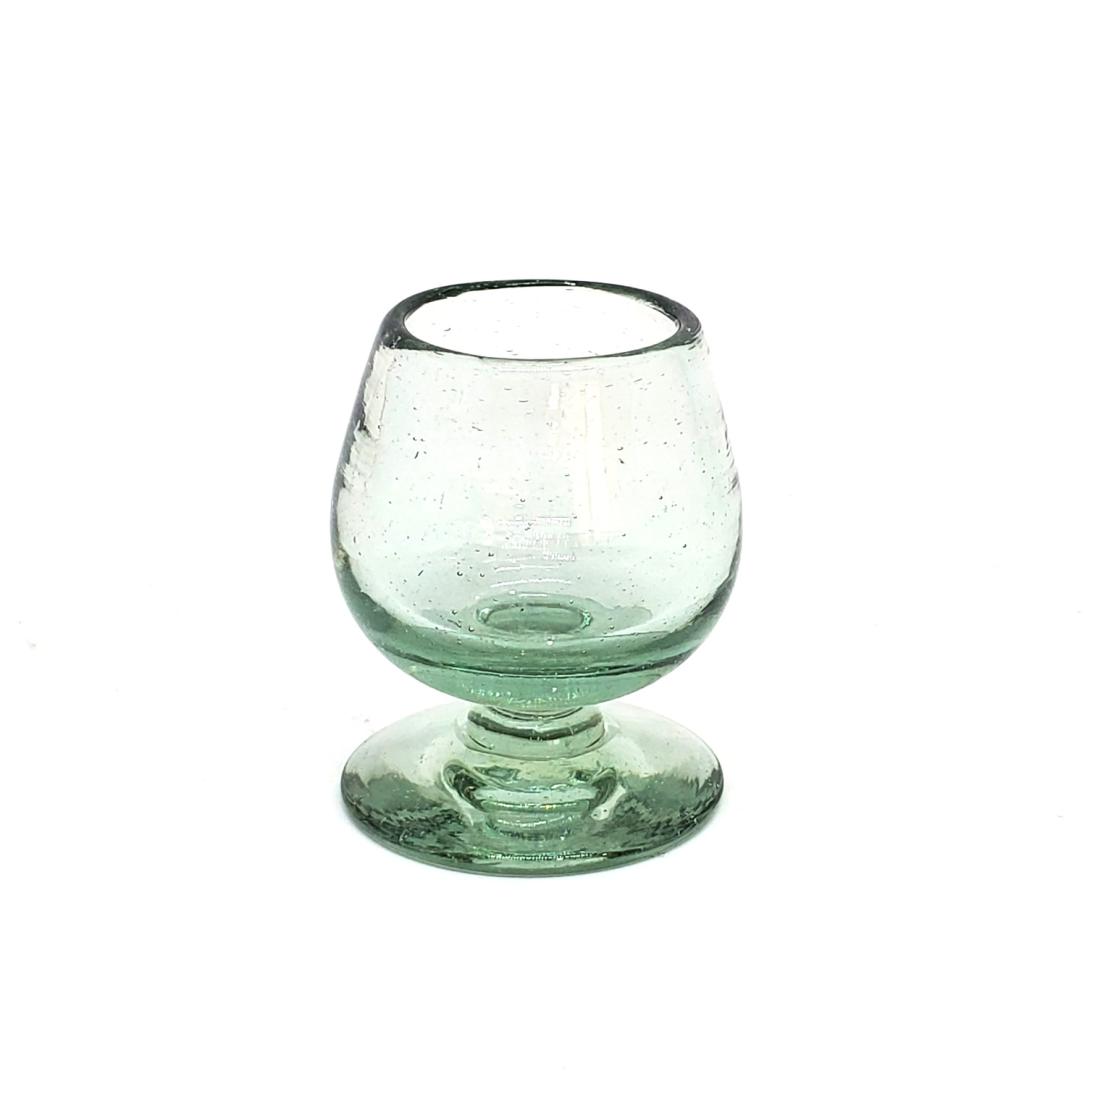 New Items / Clear 2.5 oz Tequila Sippers  (set of 6) / Sip your favourite tequila or mezcal with these iconic clear handcrafted sipping glasses. You may also serve lemon juice or other chasers.